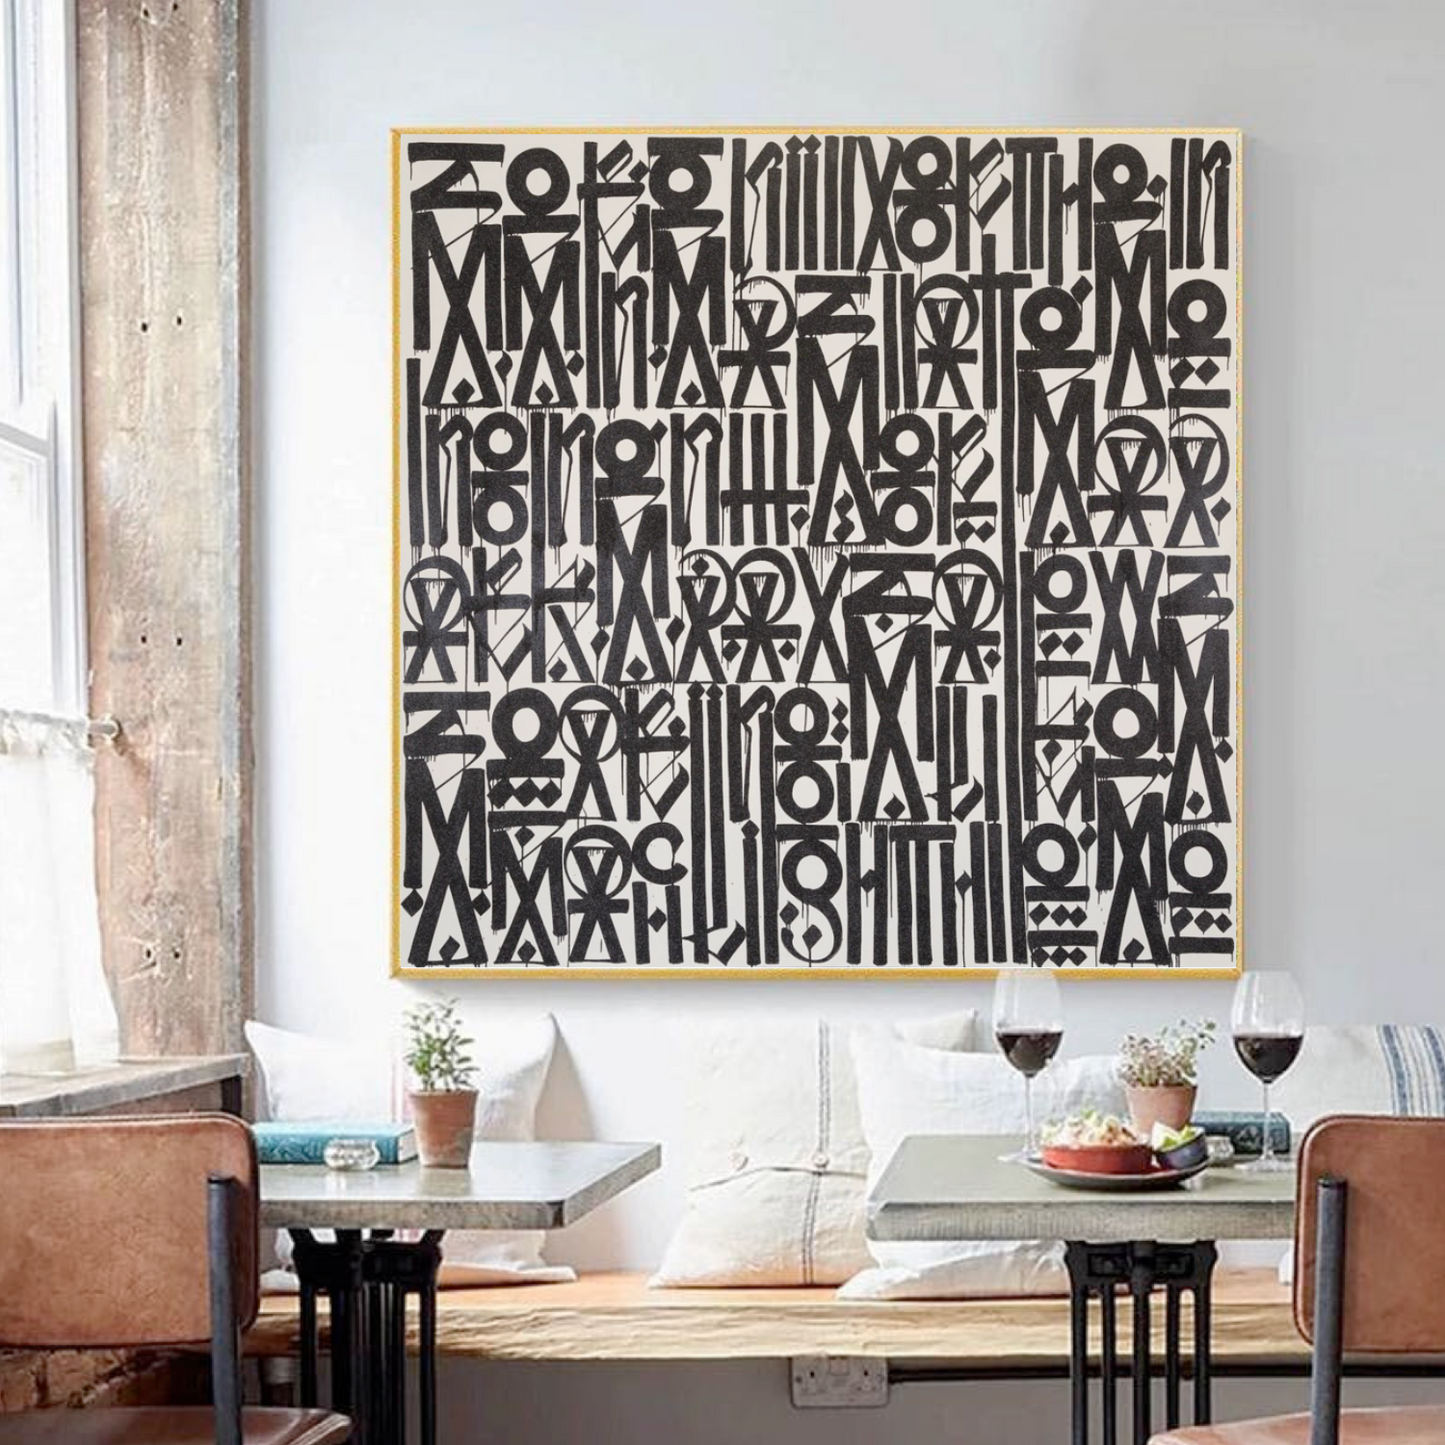 Retna Style Black White Calligraphy Font Painting